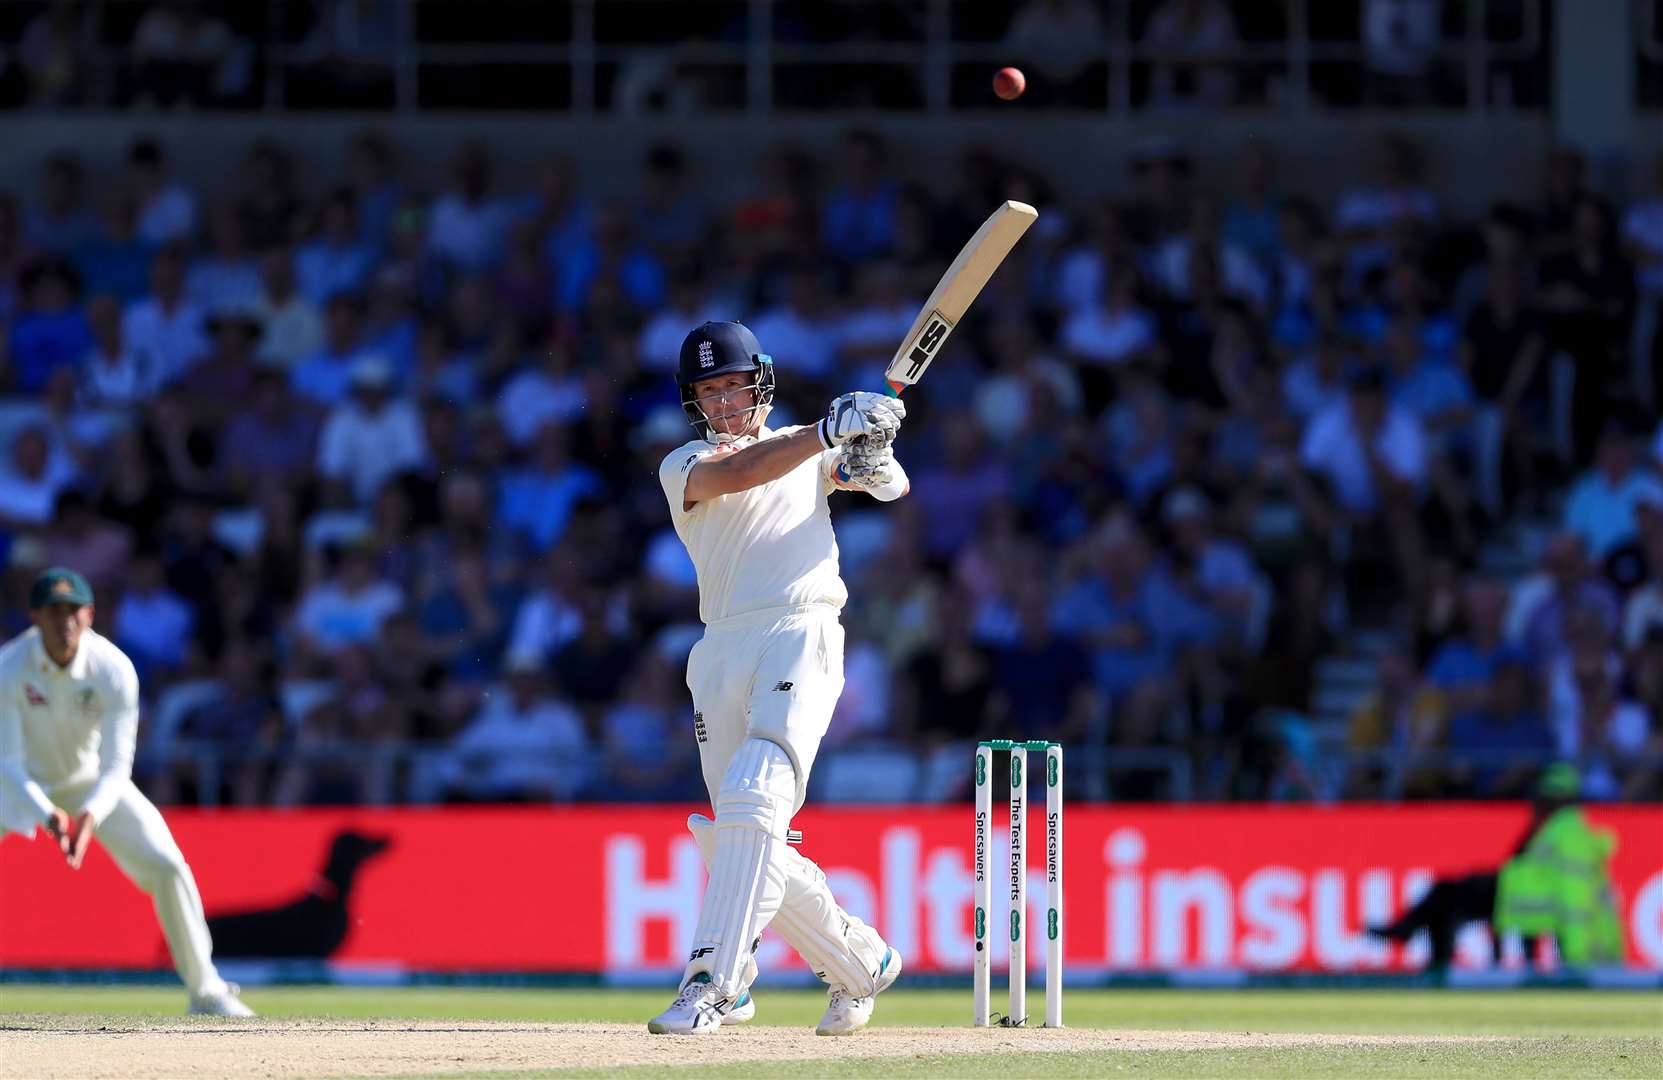 England's Joe Denly batting during day three of the third Ashes Test match at Headingley, Leeds. (16107352)